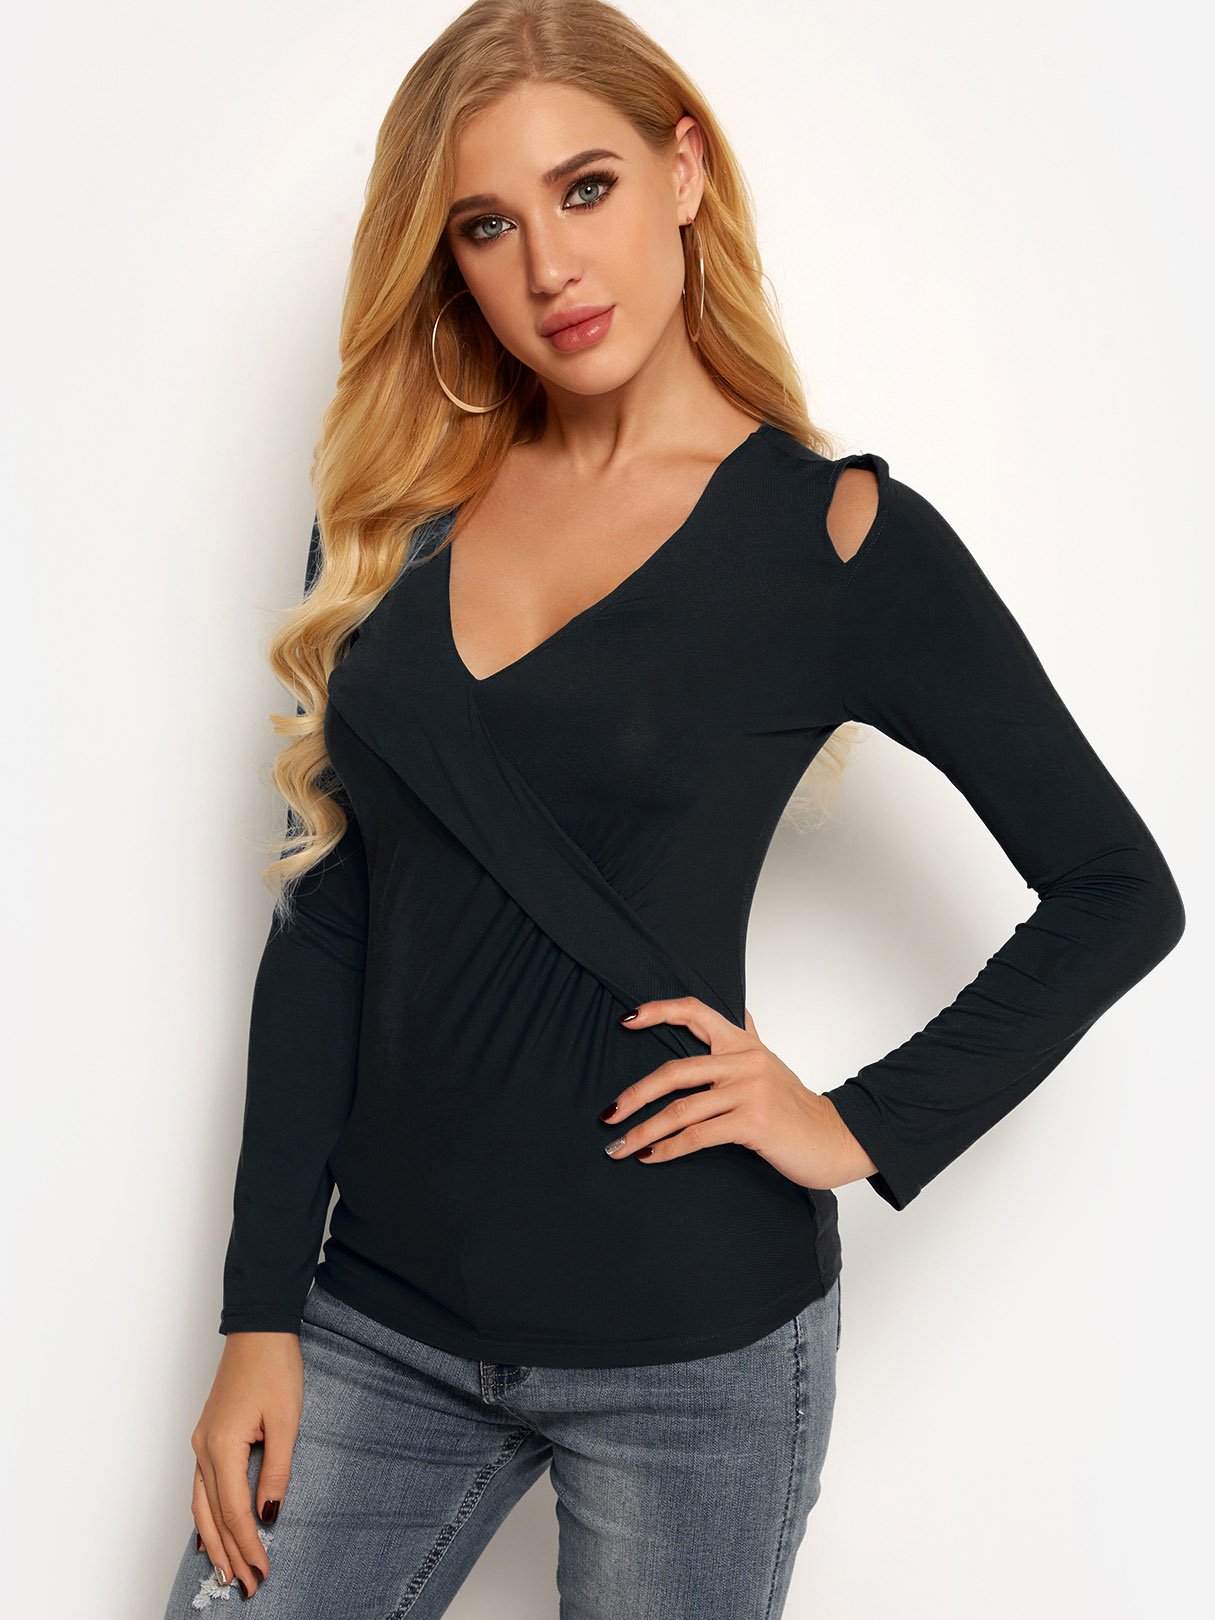 Wholesale V-Neck Plain Crossed Front Cut Out Pleated Long Sleeve Black Top